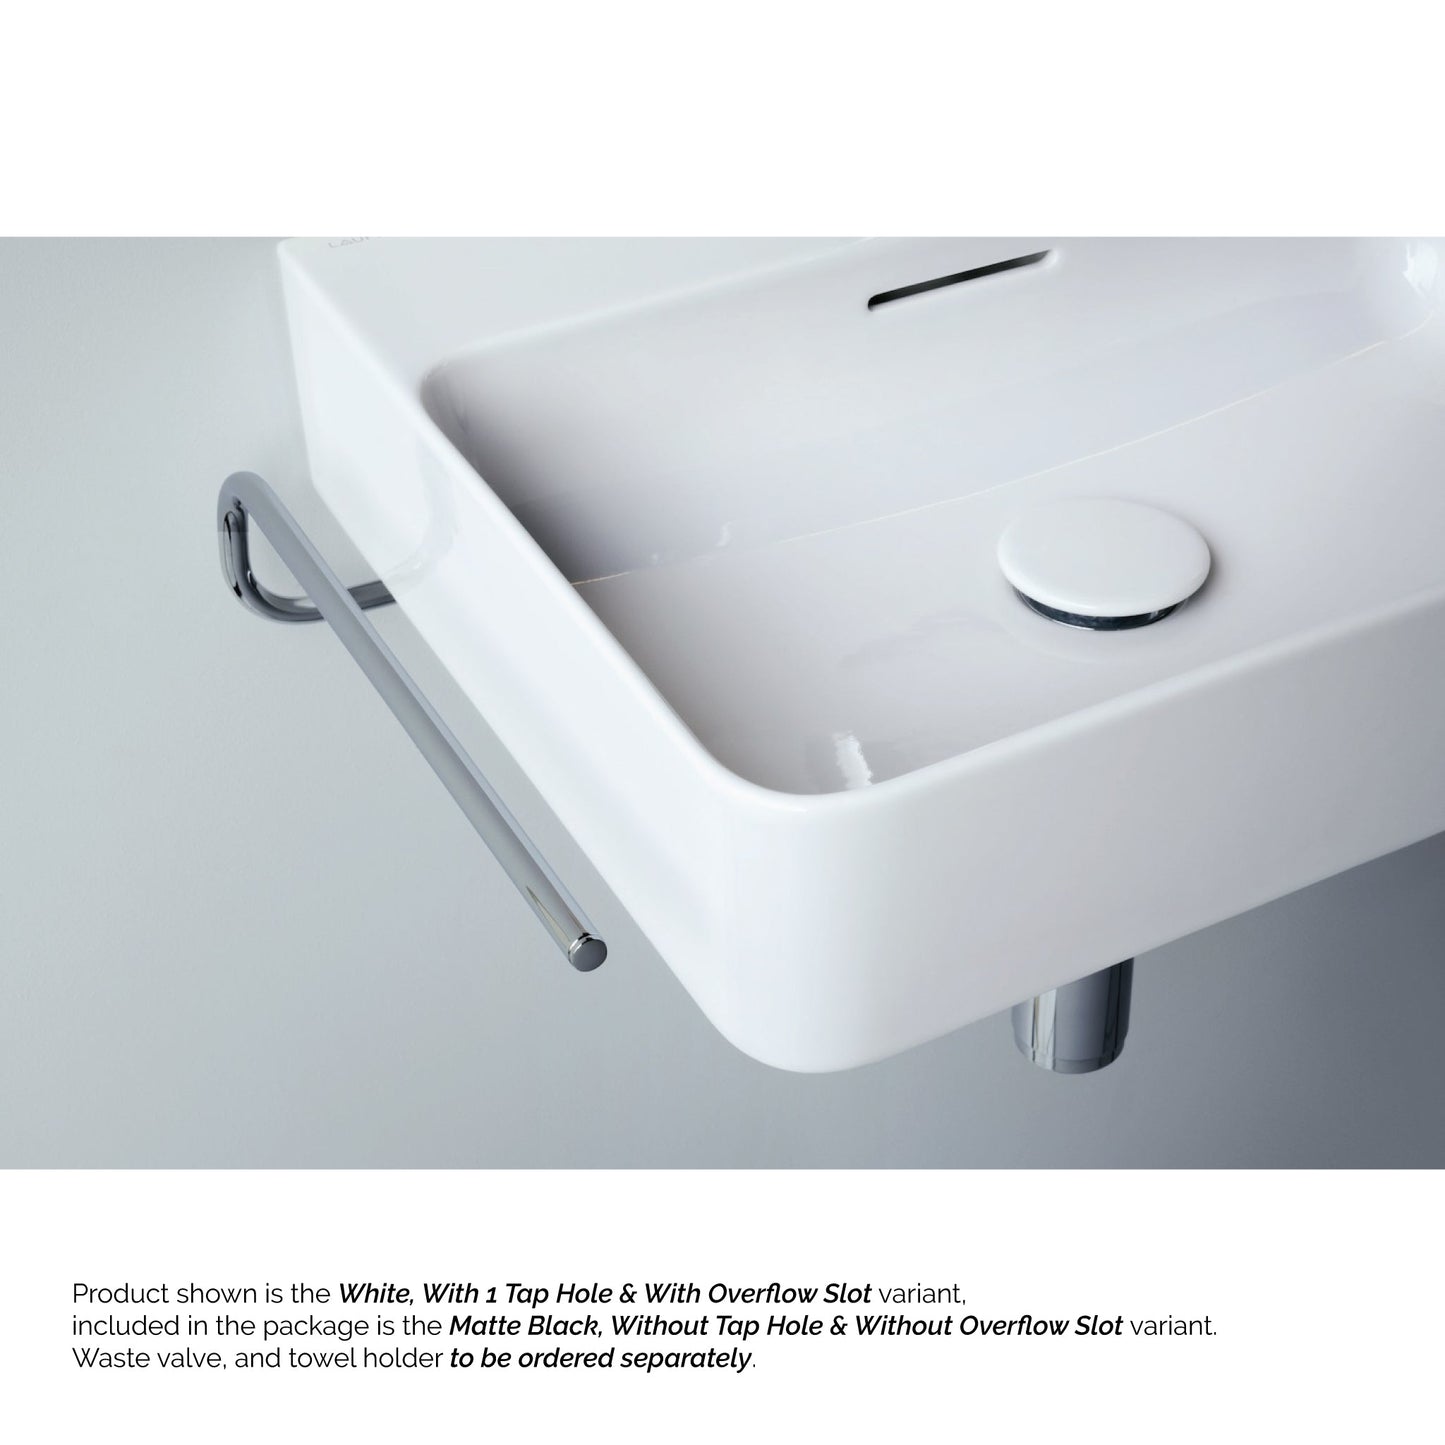 Laufen Val 24" x 12" Rectangular Matte Black Wall-Mounted Bathroom Sink Without Facuet Holes and Overflow Slot